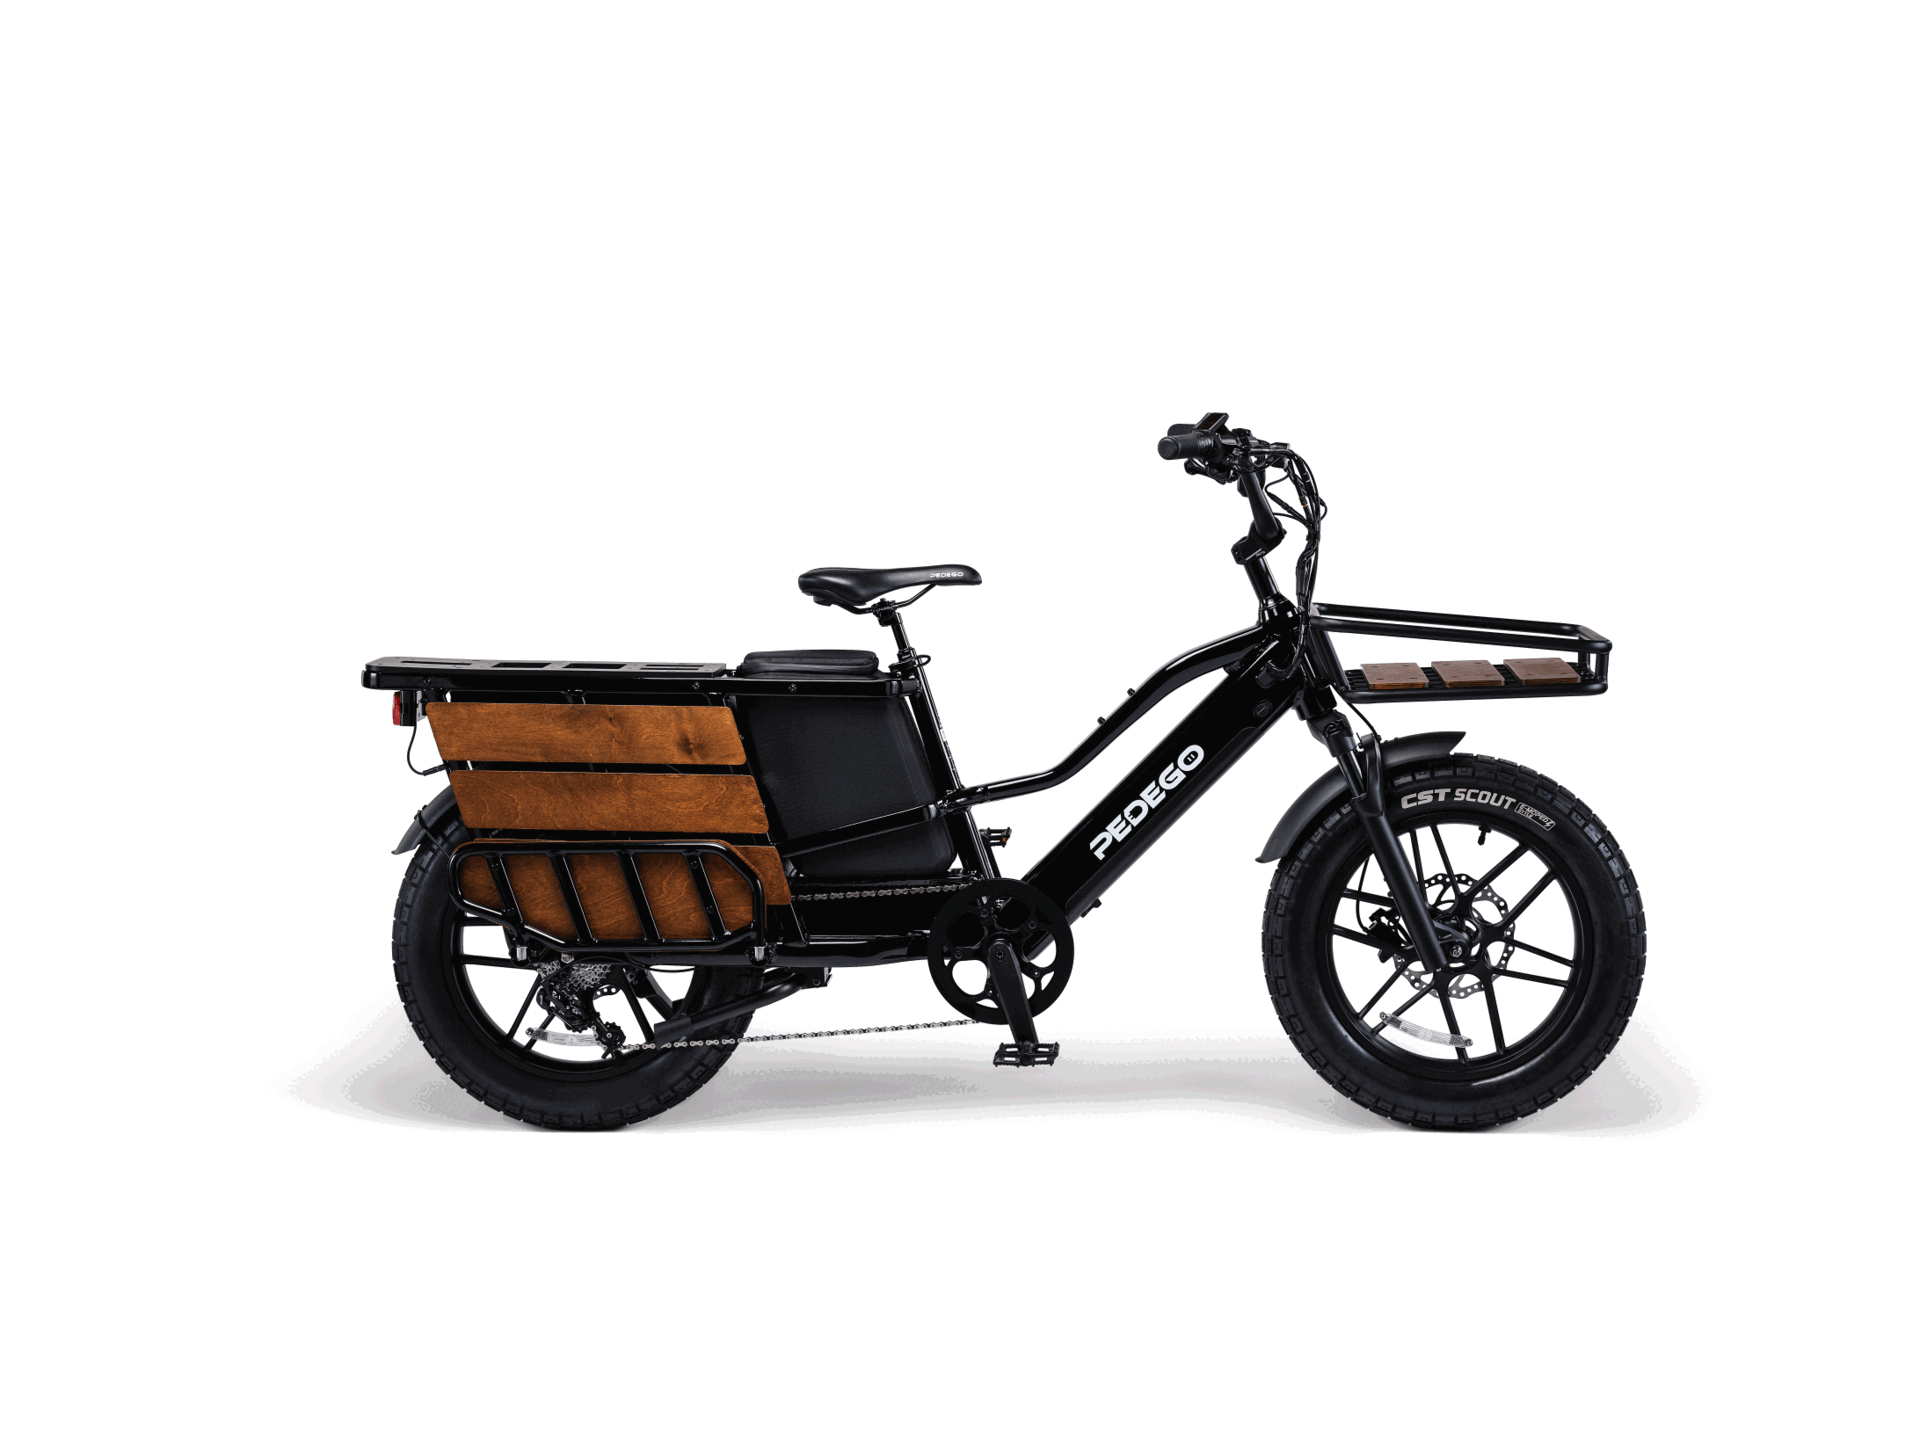 Pedego- Black electric CARGO bike with wooden side panels on a white background.